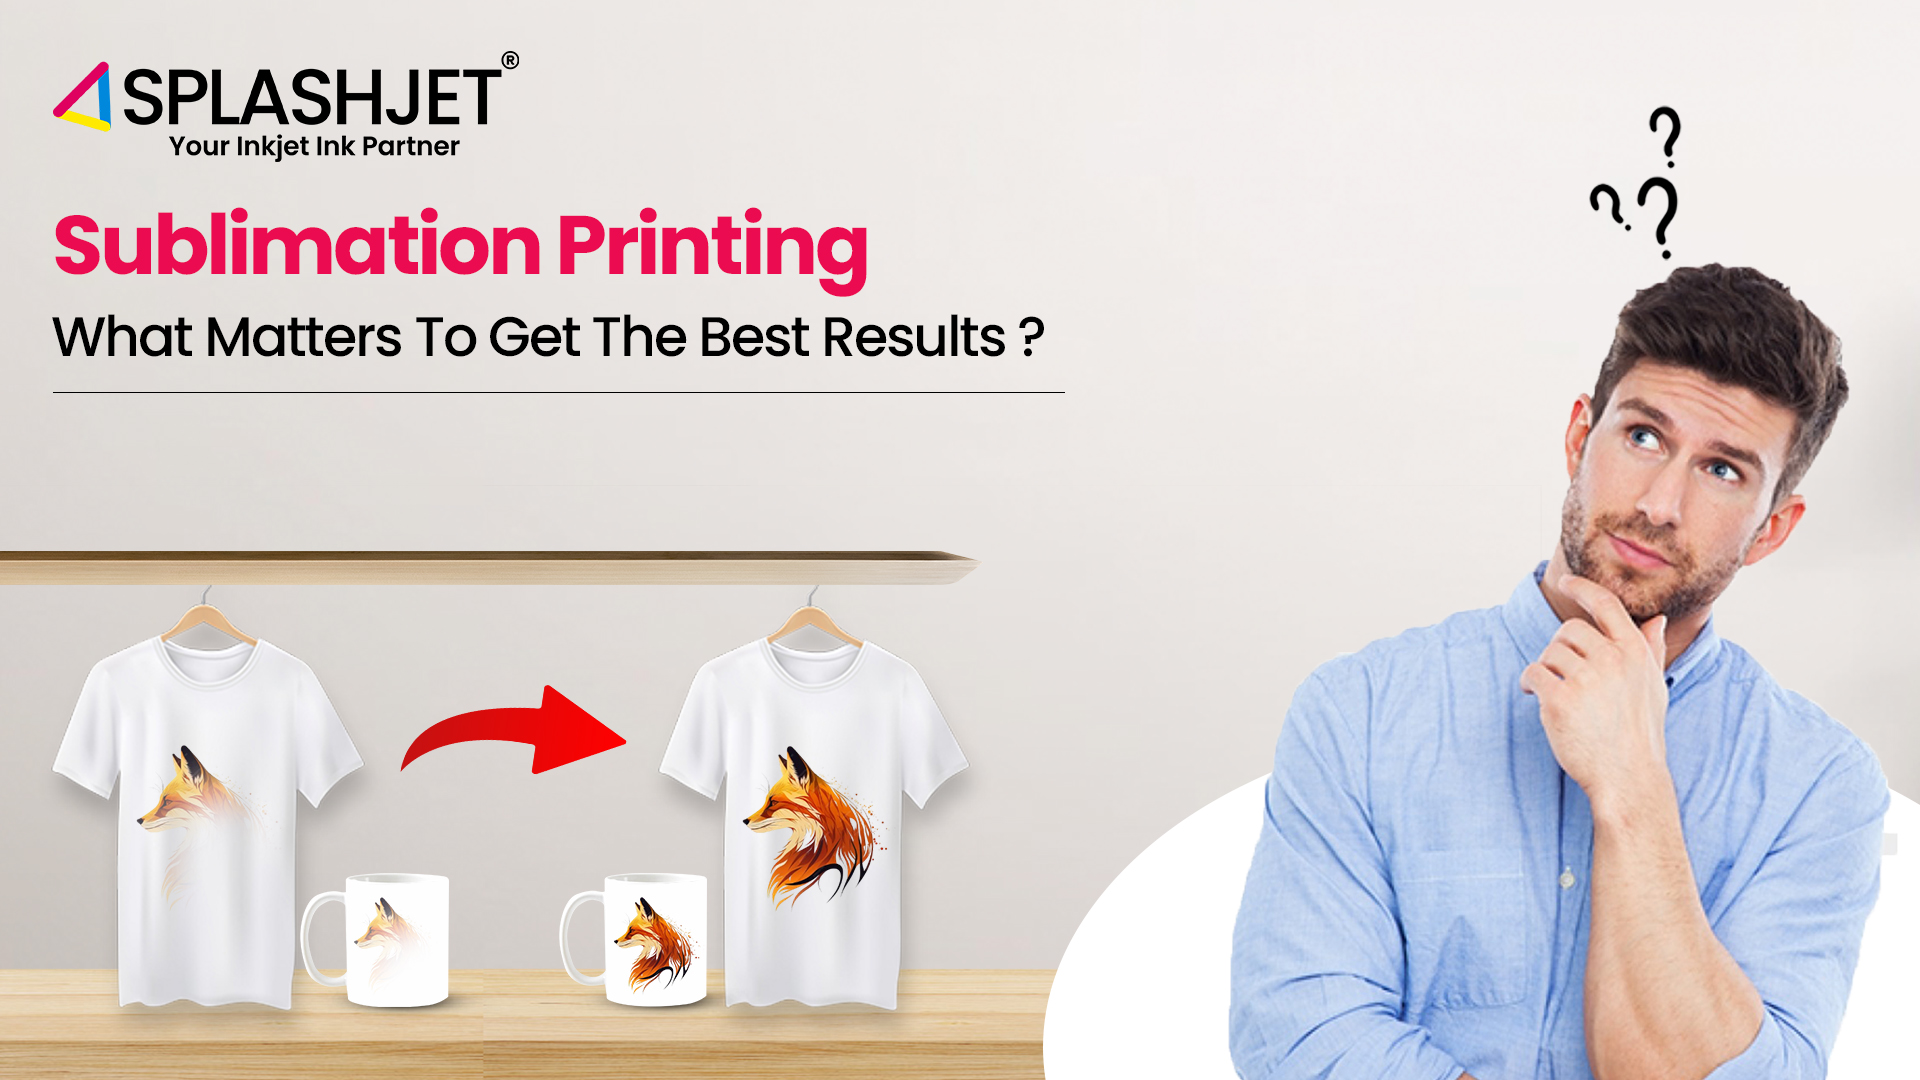 Sublimation printing: what matters to get the best results?